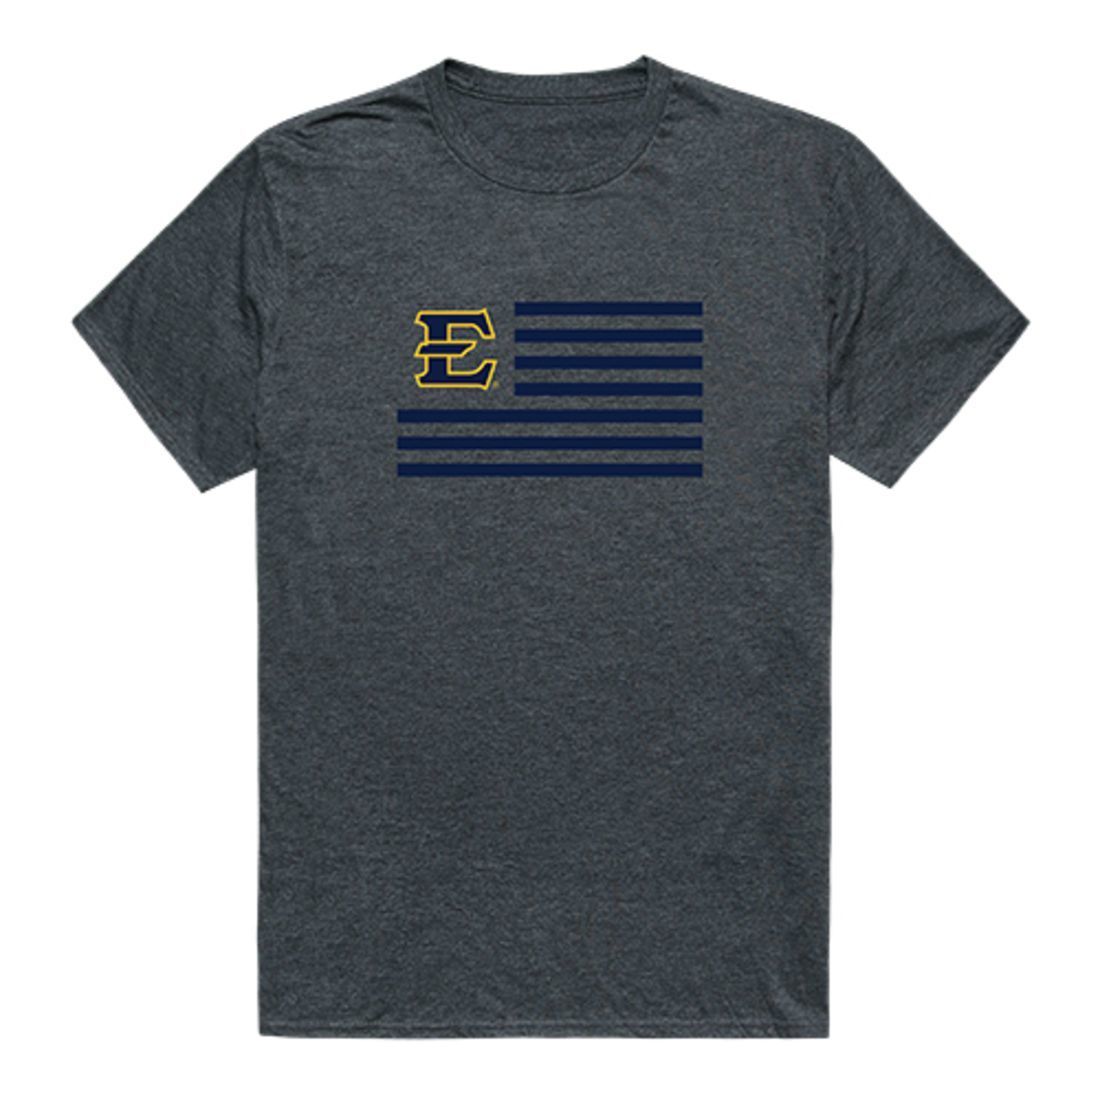 ETSU East Tennessee State University Buccaneers USA Flag Tee T-Shirt Heather Charcoal-Campus-Wardrobe